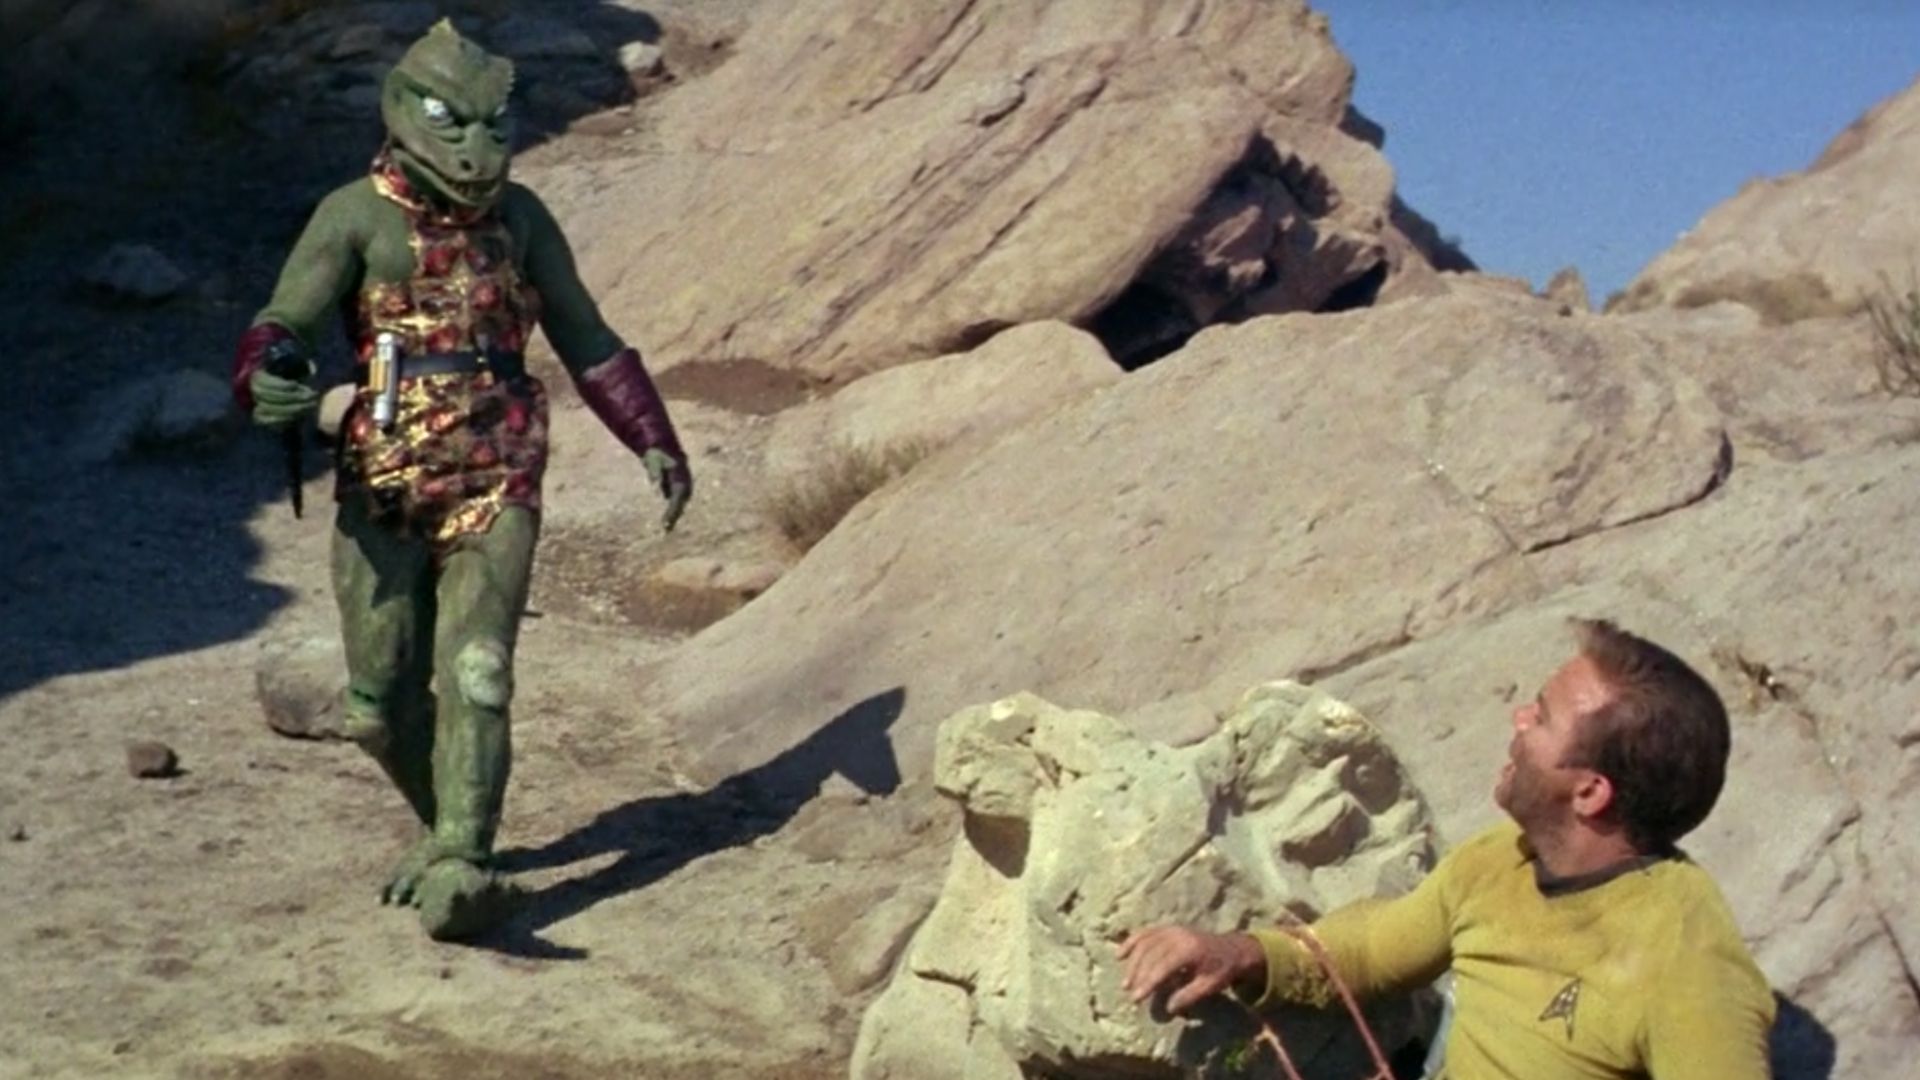 <p>                     <strong>Season 1, Episode 18</strong>                   </p>                                      <p>                     <strong>Original airdate:</strong> January 19, 1967                    </p>                                      <p>                     Arena features one of Star Trek’s most frequently visited recurring themes: humanity’s propensity for violence. An unknown vessel fires upon the Enterprise, which gives chase. Both ships venture into the territory of the Metrons, which decide to settle the matter by pitting Kirk and the other vessel’s captain against each other in one-on-one combat. The winner’s ship gets to go free, the loser, not so much.                    </p>                                      <p>                     The other captain is the reptilian Gorn who Kirk fells after cobbling together a bazooka out of bamboo and rocks; if you were ever wondering where the “rudimentary lathe” joke from Galaxy Quest came from, now you know. When Kirk spares the Gorn’s life, the Metrons decide maybe there’s hope for humanity after all (another constant Star Trek refrain) and allow both ships to go free.                     </p>